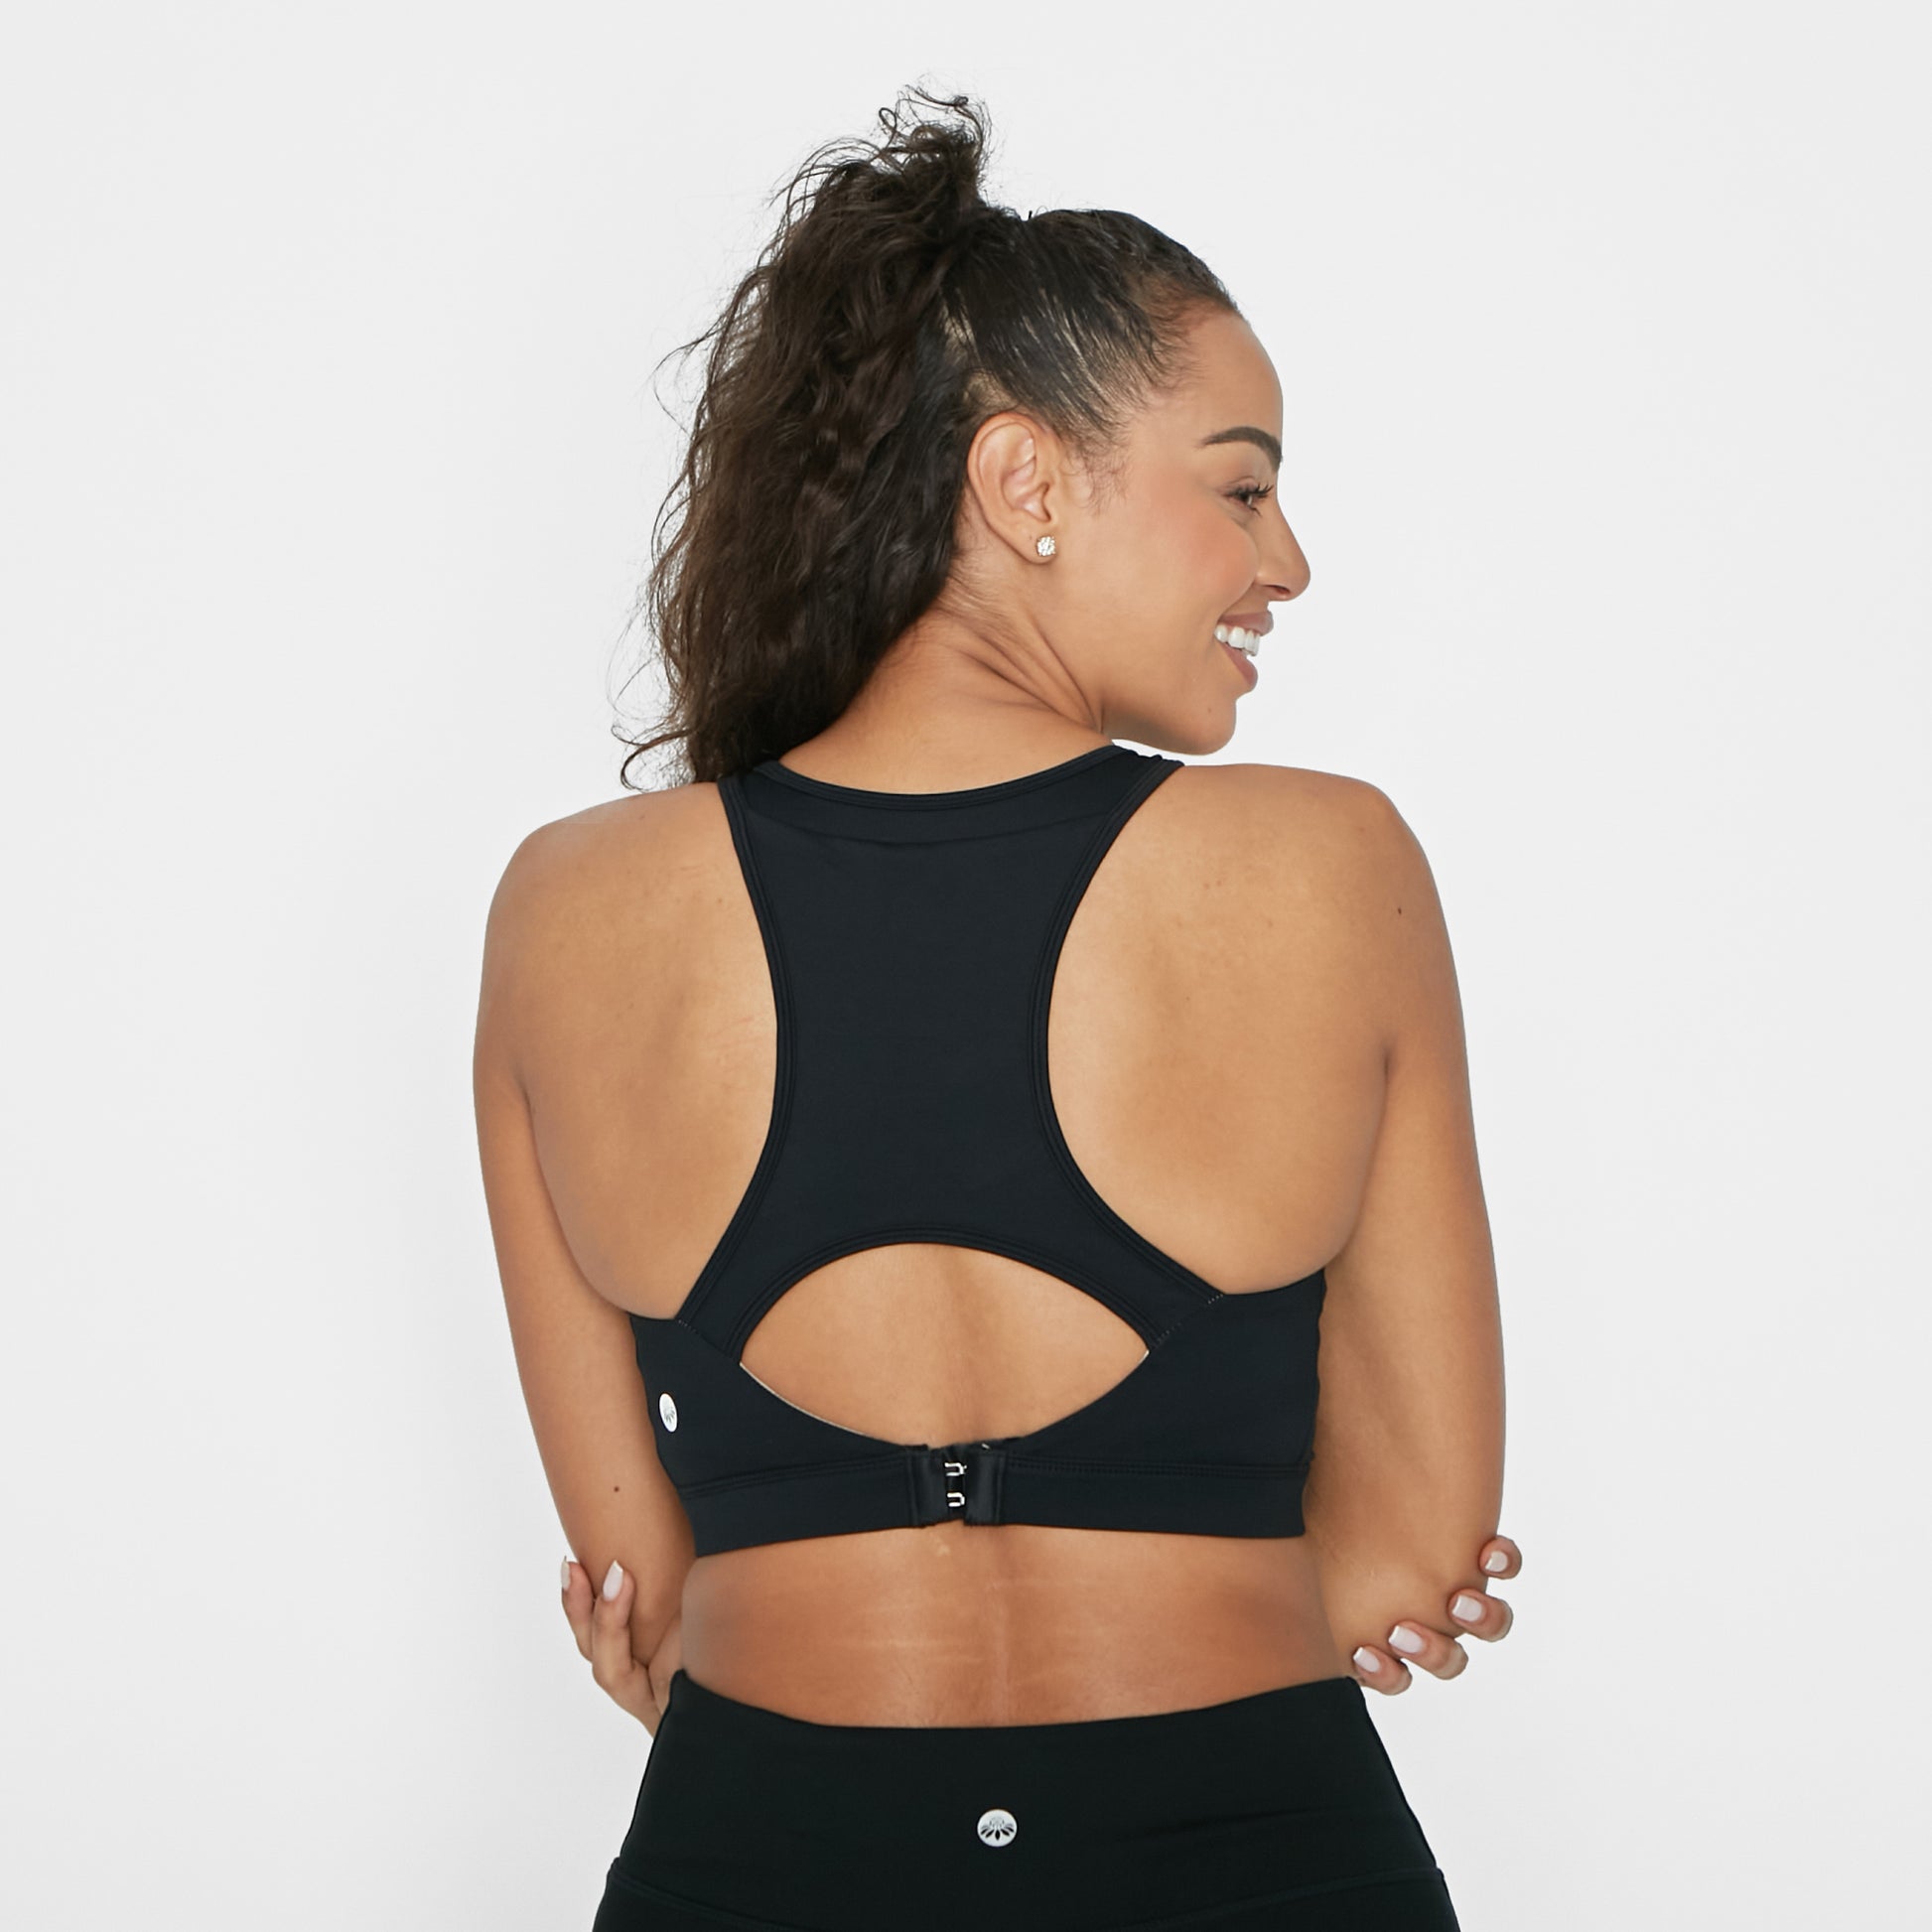 We perfected a sports bra for small boobs 🏆 - Senita Athletics